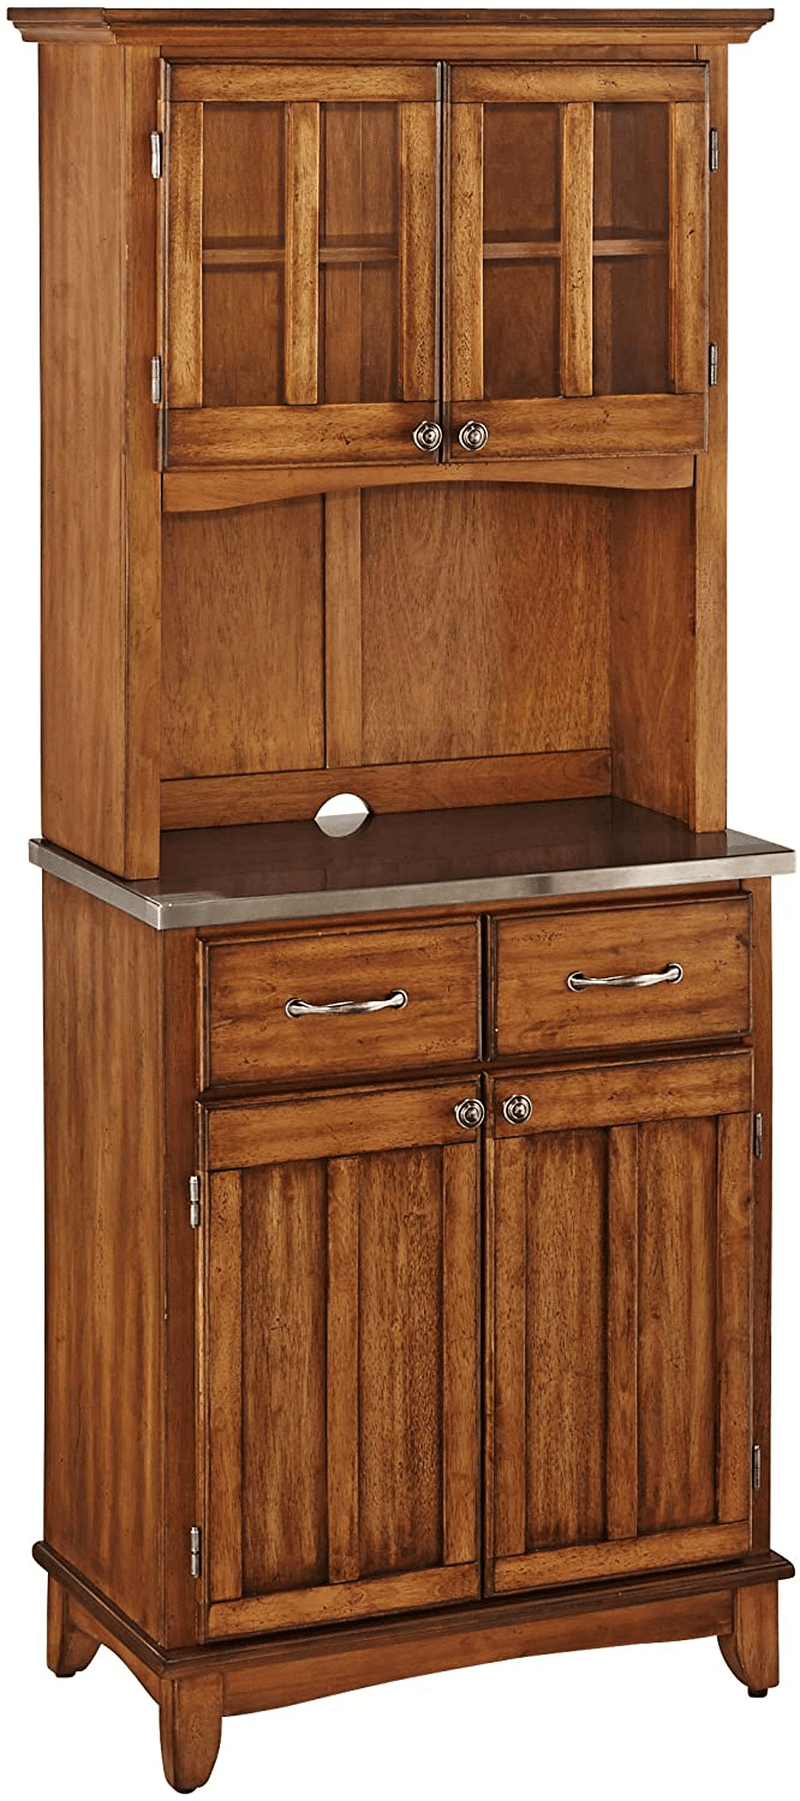 Buffet of Buffet Cottage Oak with Wood Top with Hutch by Home Styles Home & Garden > Kitchen & Dining > Food Storage Home Styles Oak Stainless Top Server + Hutch